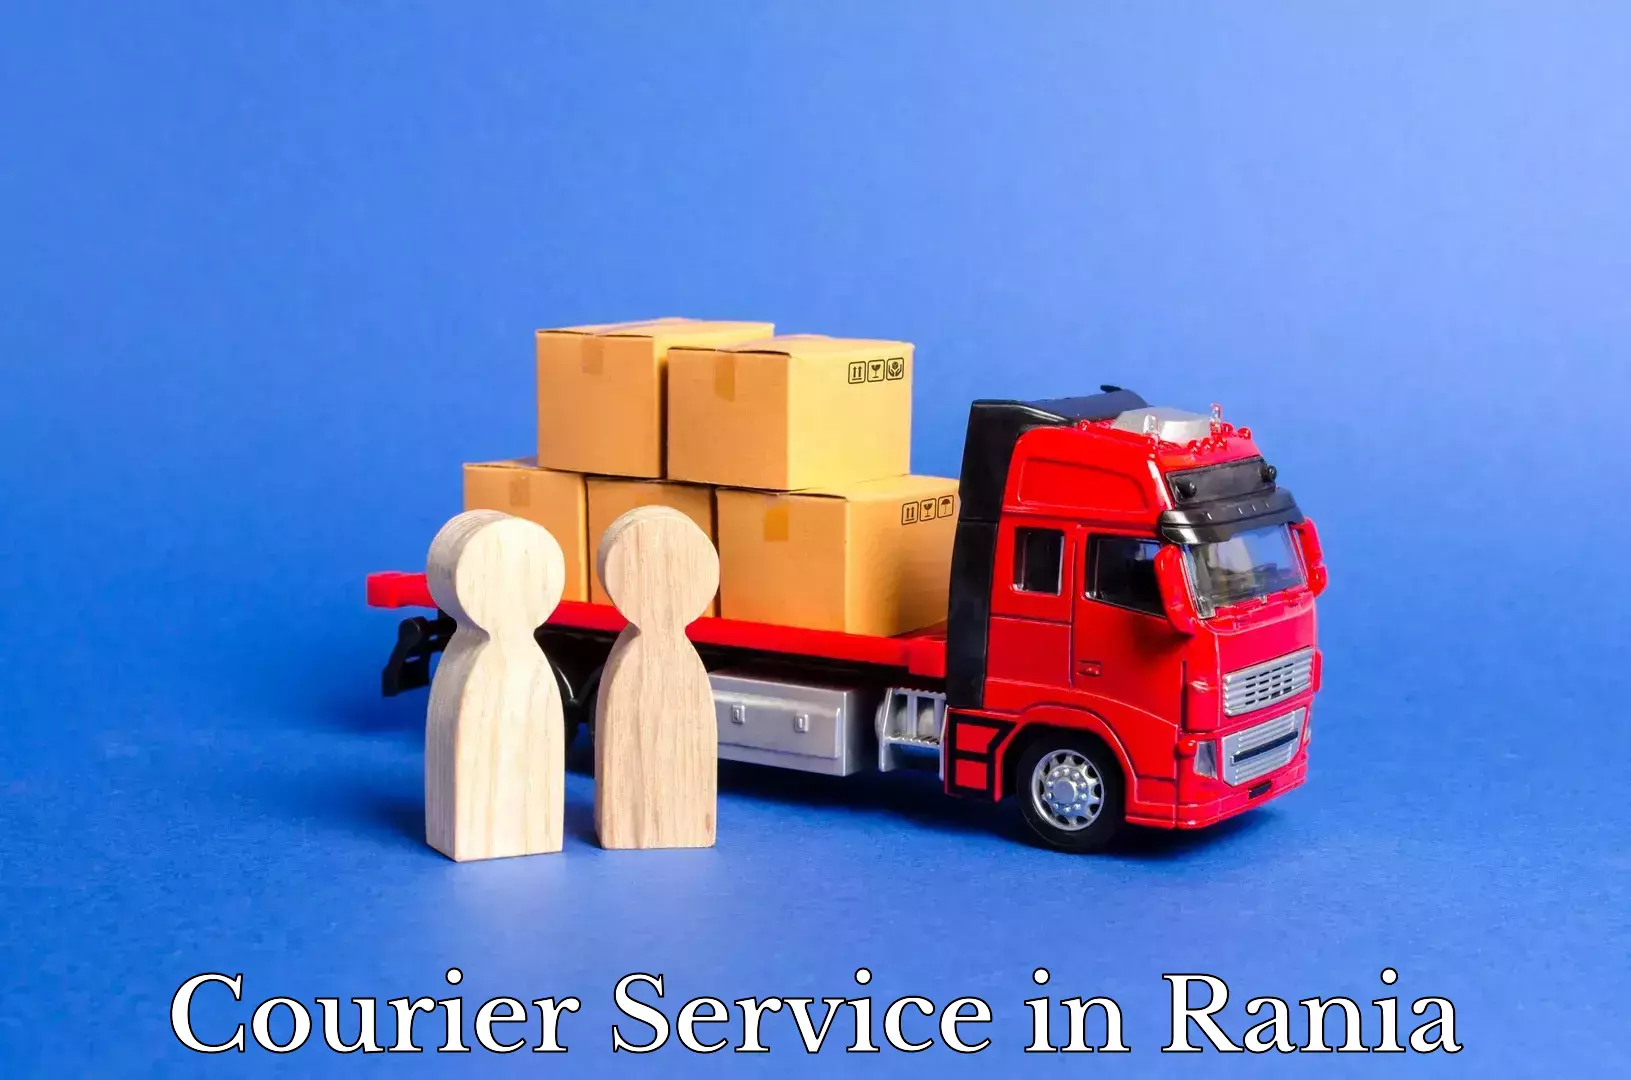 Expedited shipping methods in Rania